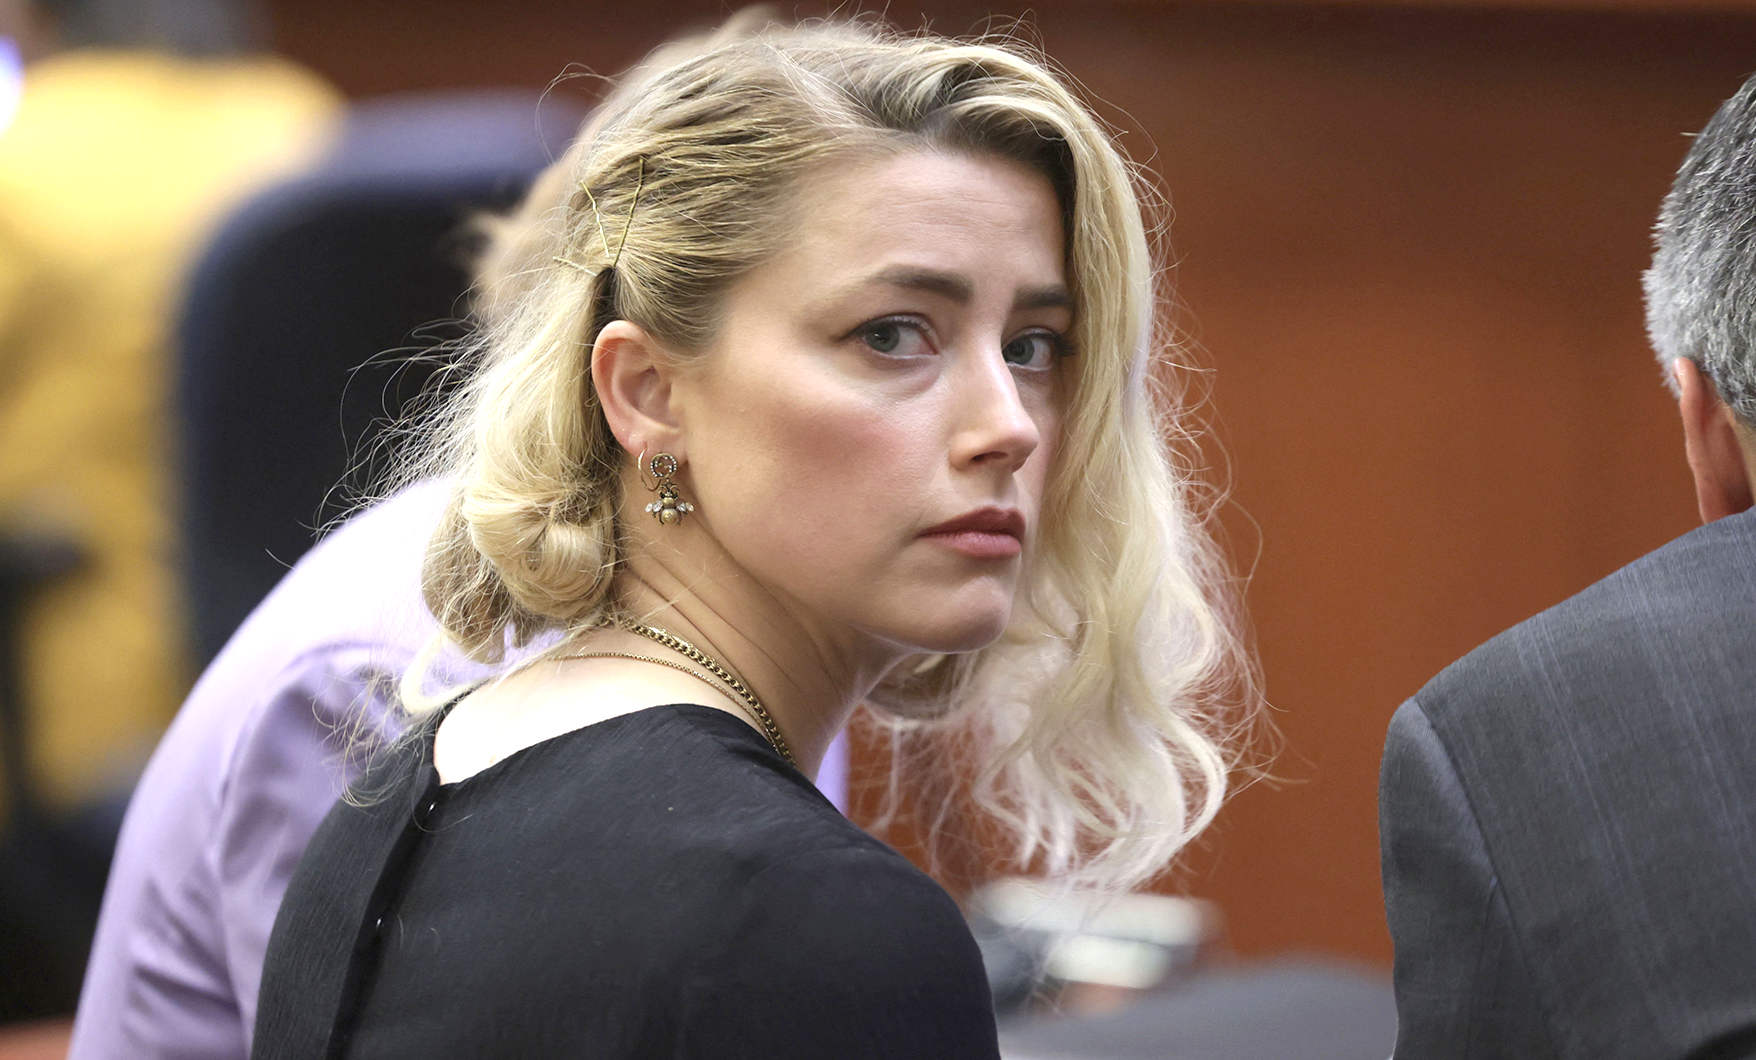 Amber Heard, plays Mera in Aquaman, seen here in court with Johhny Depp. Thank heavens all that is over with. For both parties, we imagine, a steep learning curve.